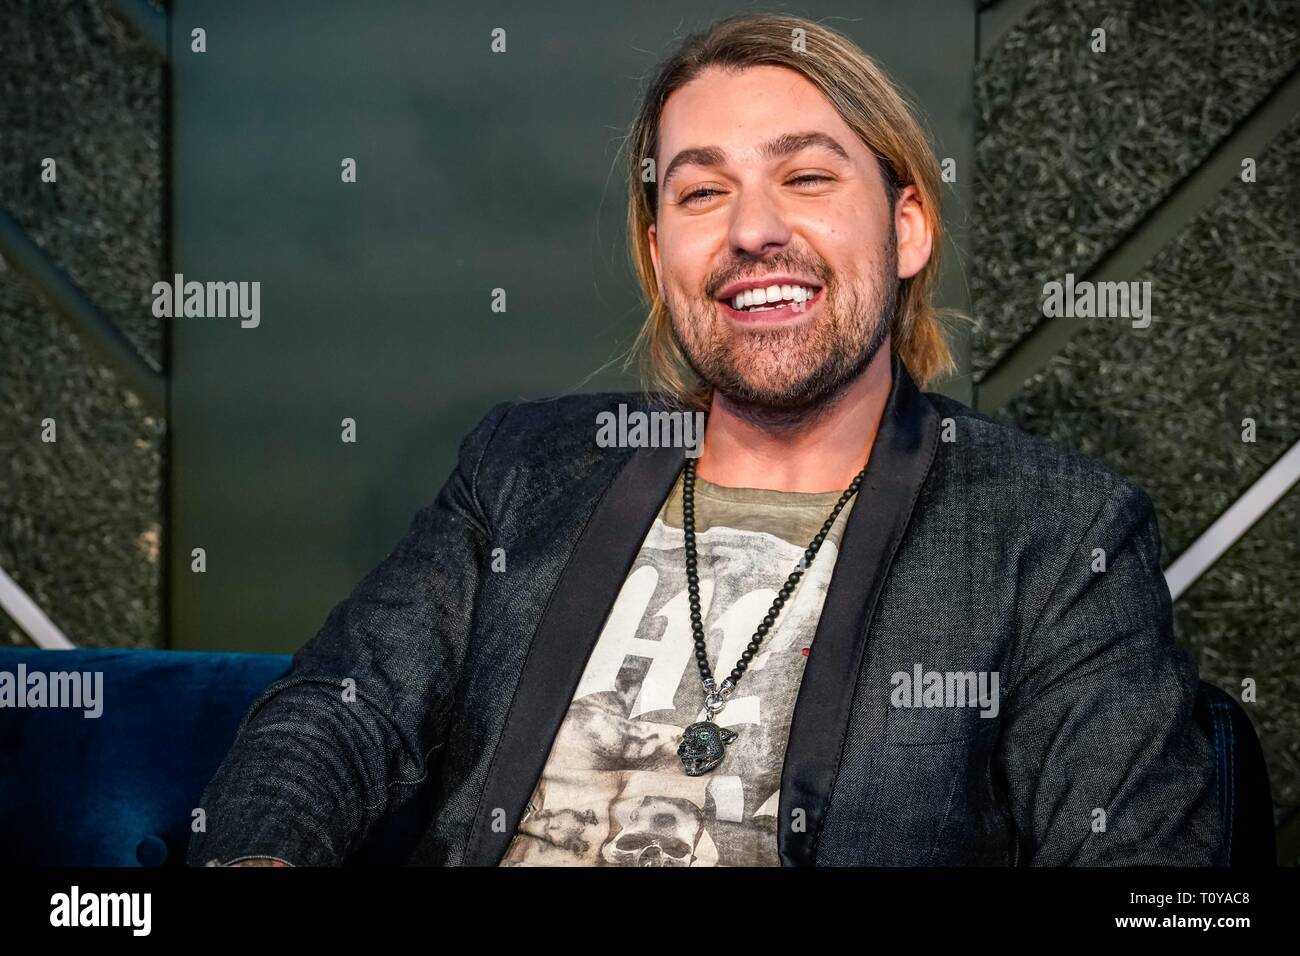 Berlin, Deutschland. 21st Mar, 2019. 21.03.2019, star violinist David Garrett presents his new crossover tour UNLIMITED - GREATEST HITS at the 260-degree bar in Berlin, with which he will perform in the capital. Portrait of the musician. | usage worldwide Credit: dpa/Alamy Live News Stock Photo